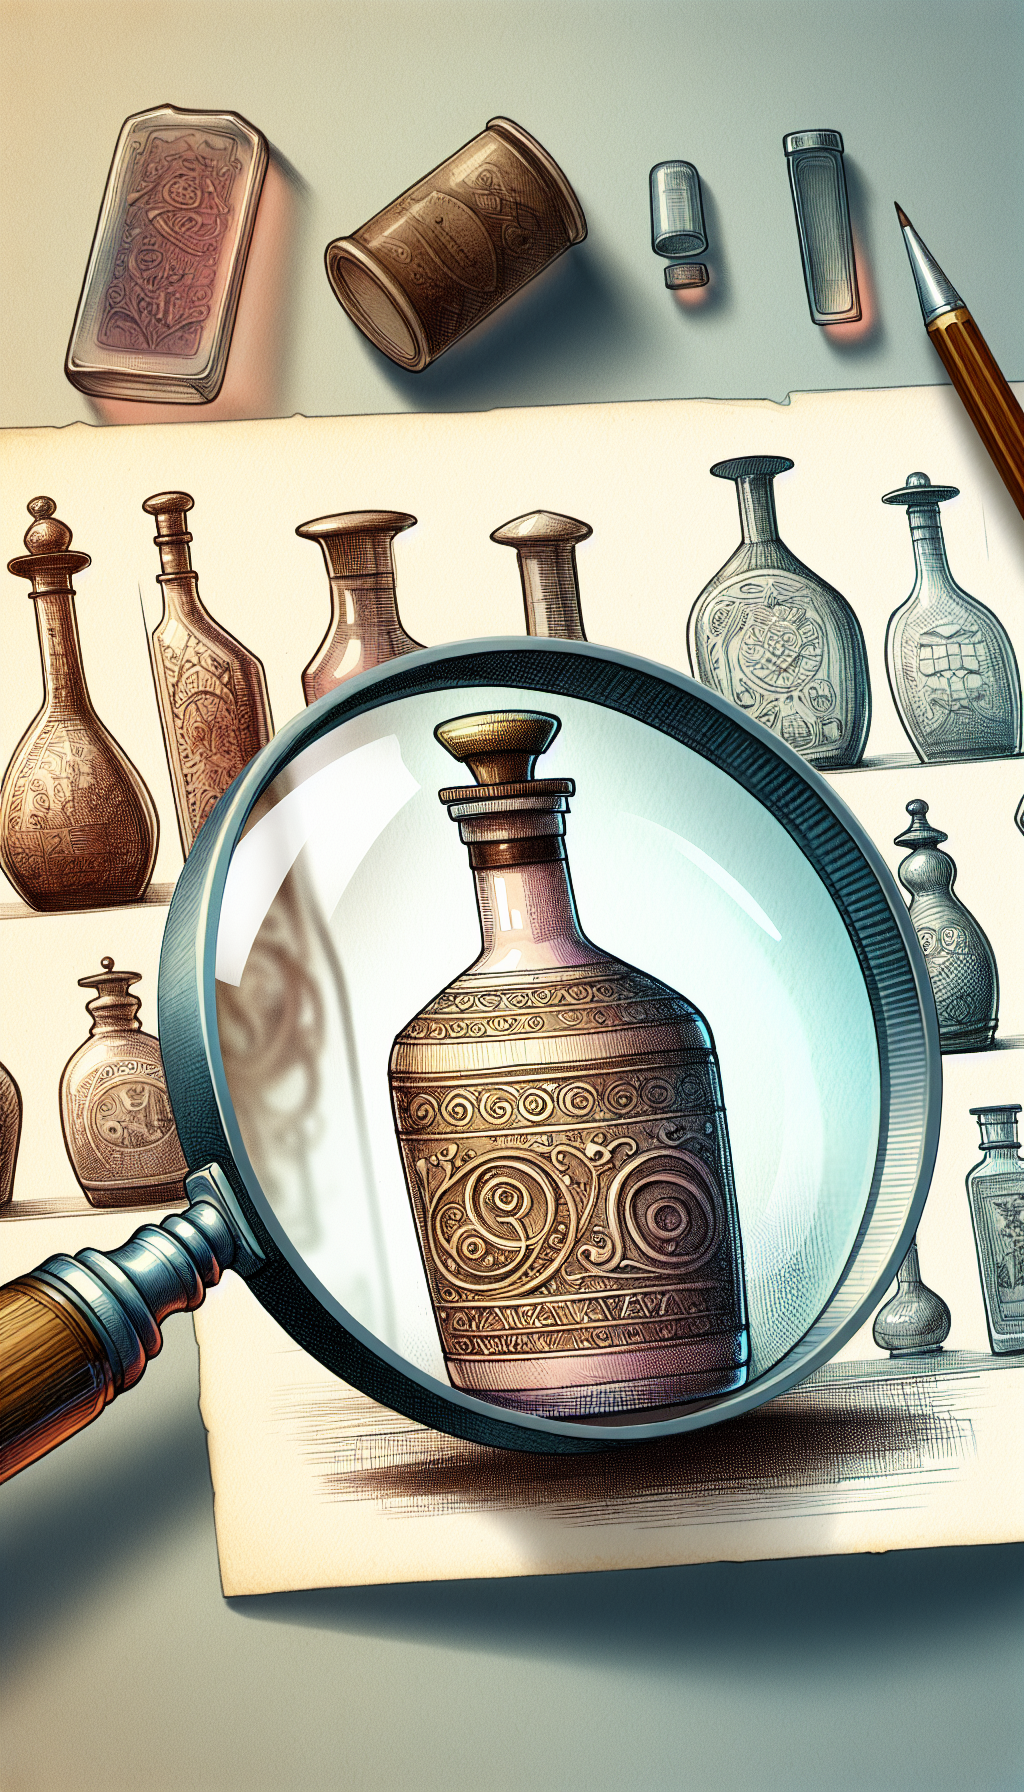 An illustration displays a magnifying glass revealing the subtle details of embossed symbols on the curve of a vintage bottle, with ghosted images of various antique bottles in the background. Styles shift dramatically within the scene: the bottle and magnifying glass are rendered in realistic detail, symbols in fine line art, and the background bottles in a soft watercolor wash.